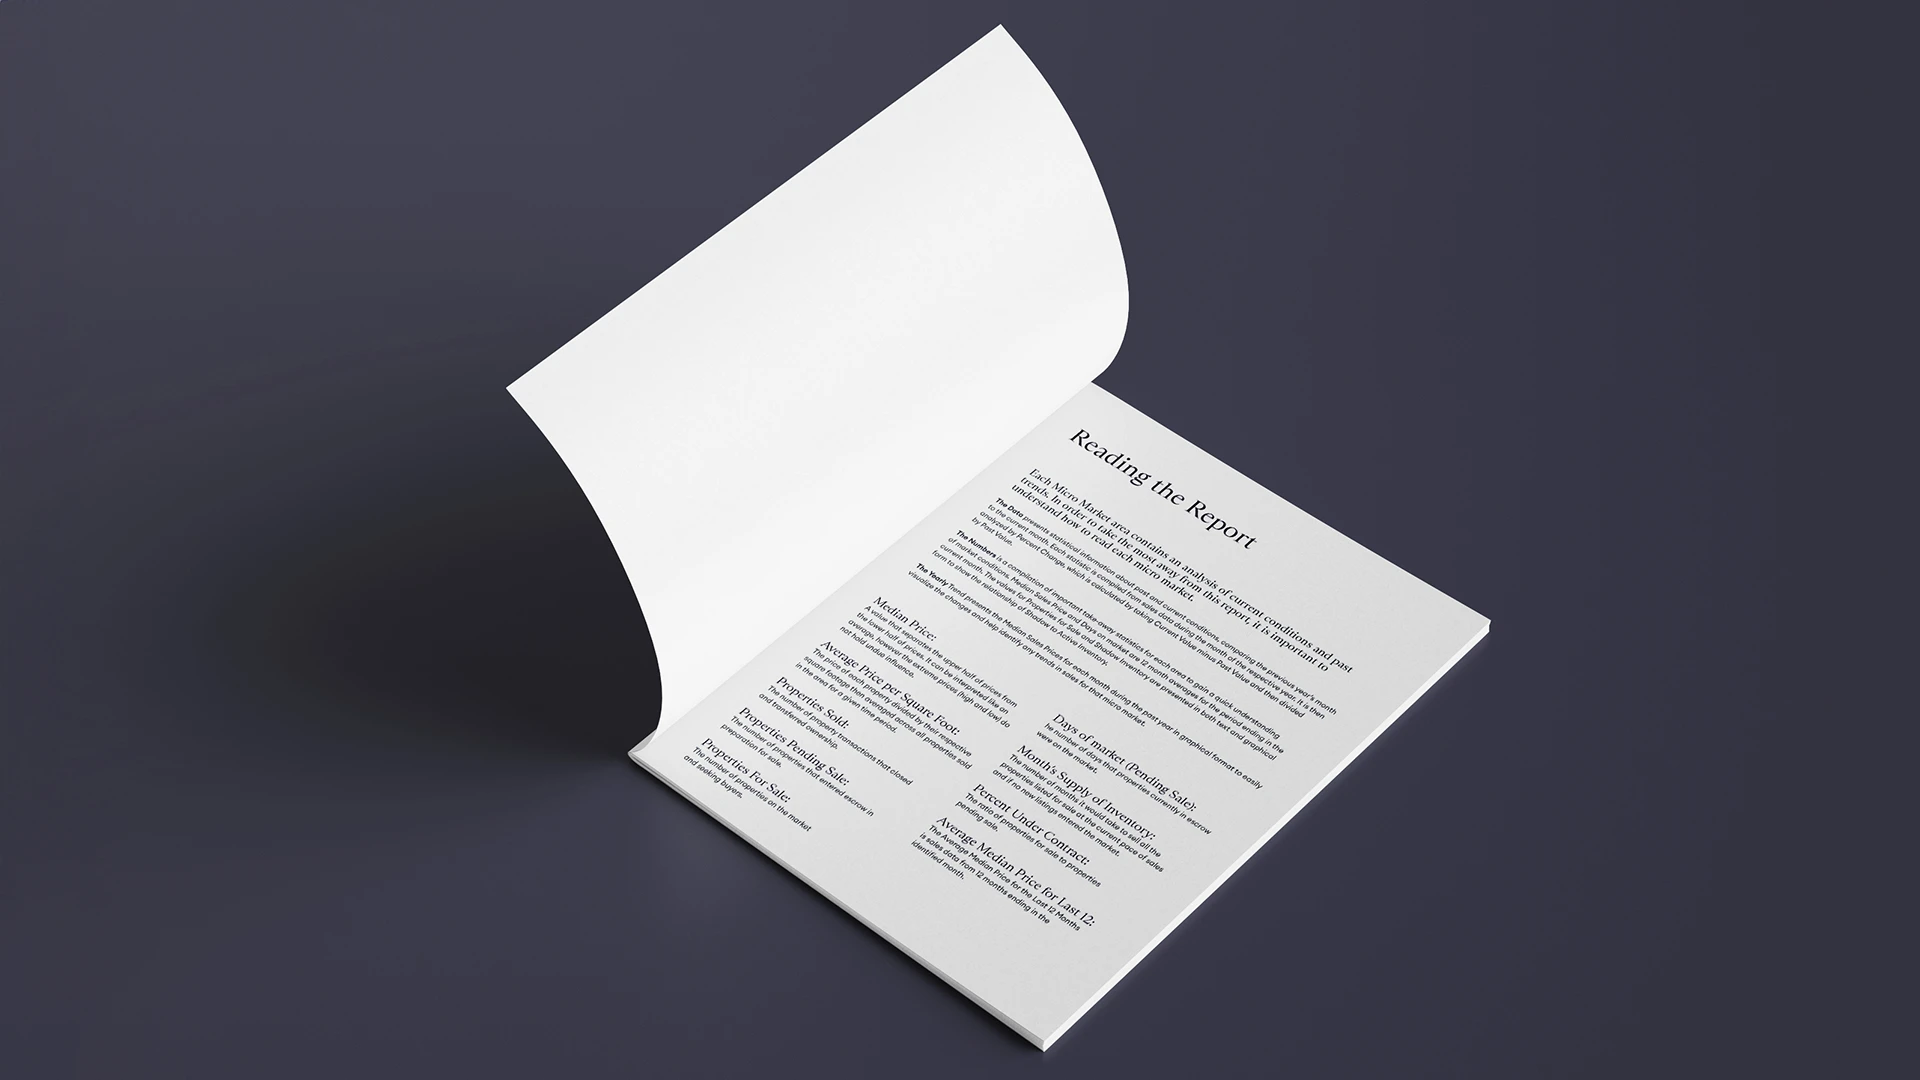 A mockup of a Micro Market Report, using the 2020 through mid-2023 design, showing the opening informational spread which has been clarified and set in appropriate Douglas Elliman brand typeset.